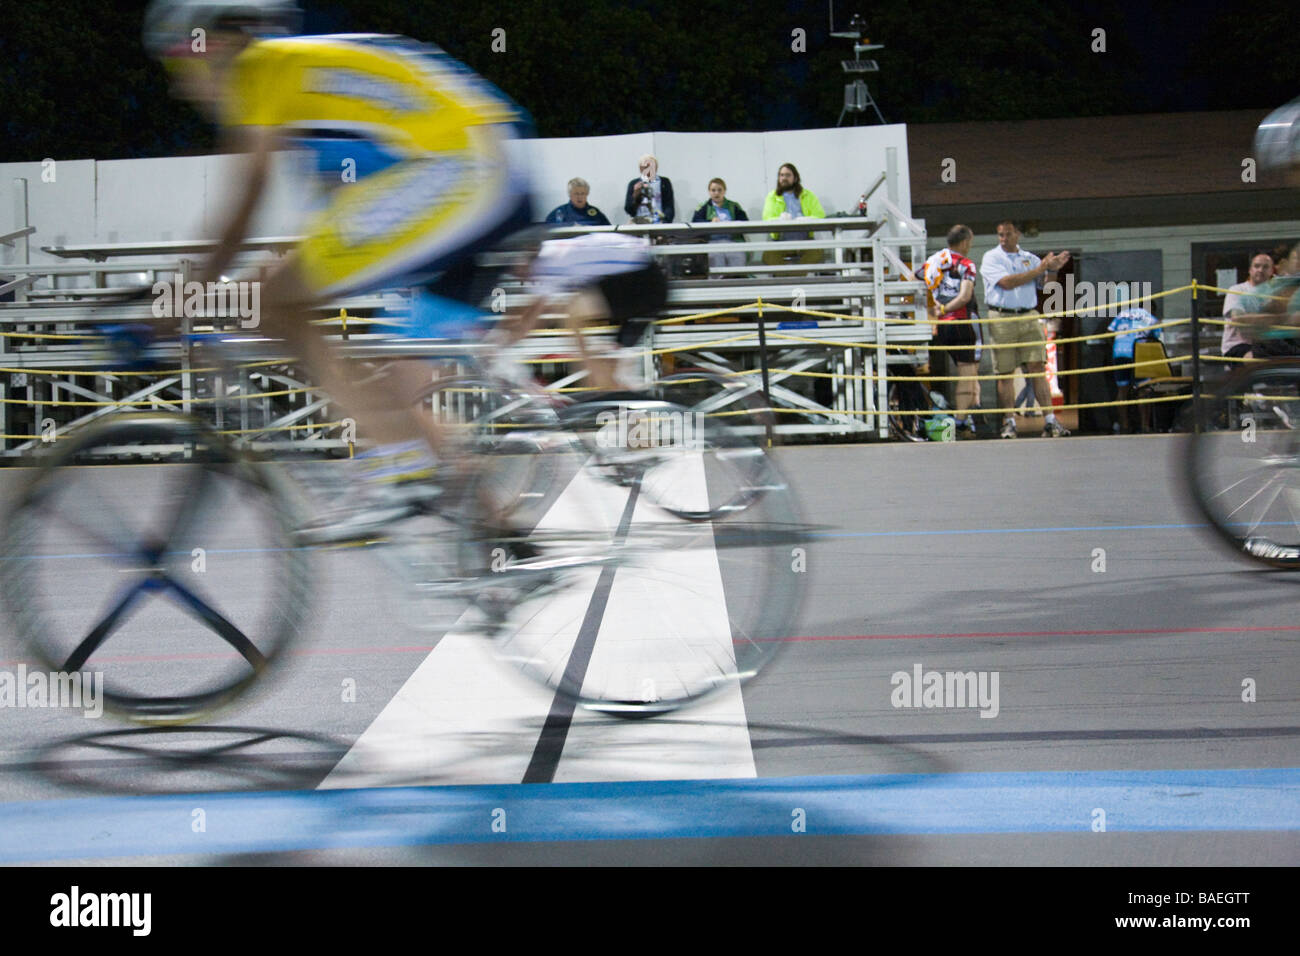 ILLINOIS Northbrook Bicyclists cross lap line during bicycle race at velodrome track spectators in stands video camera record Stock Photo